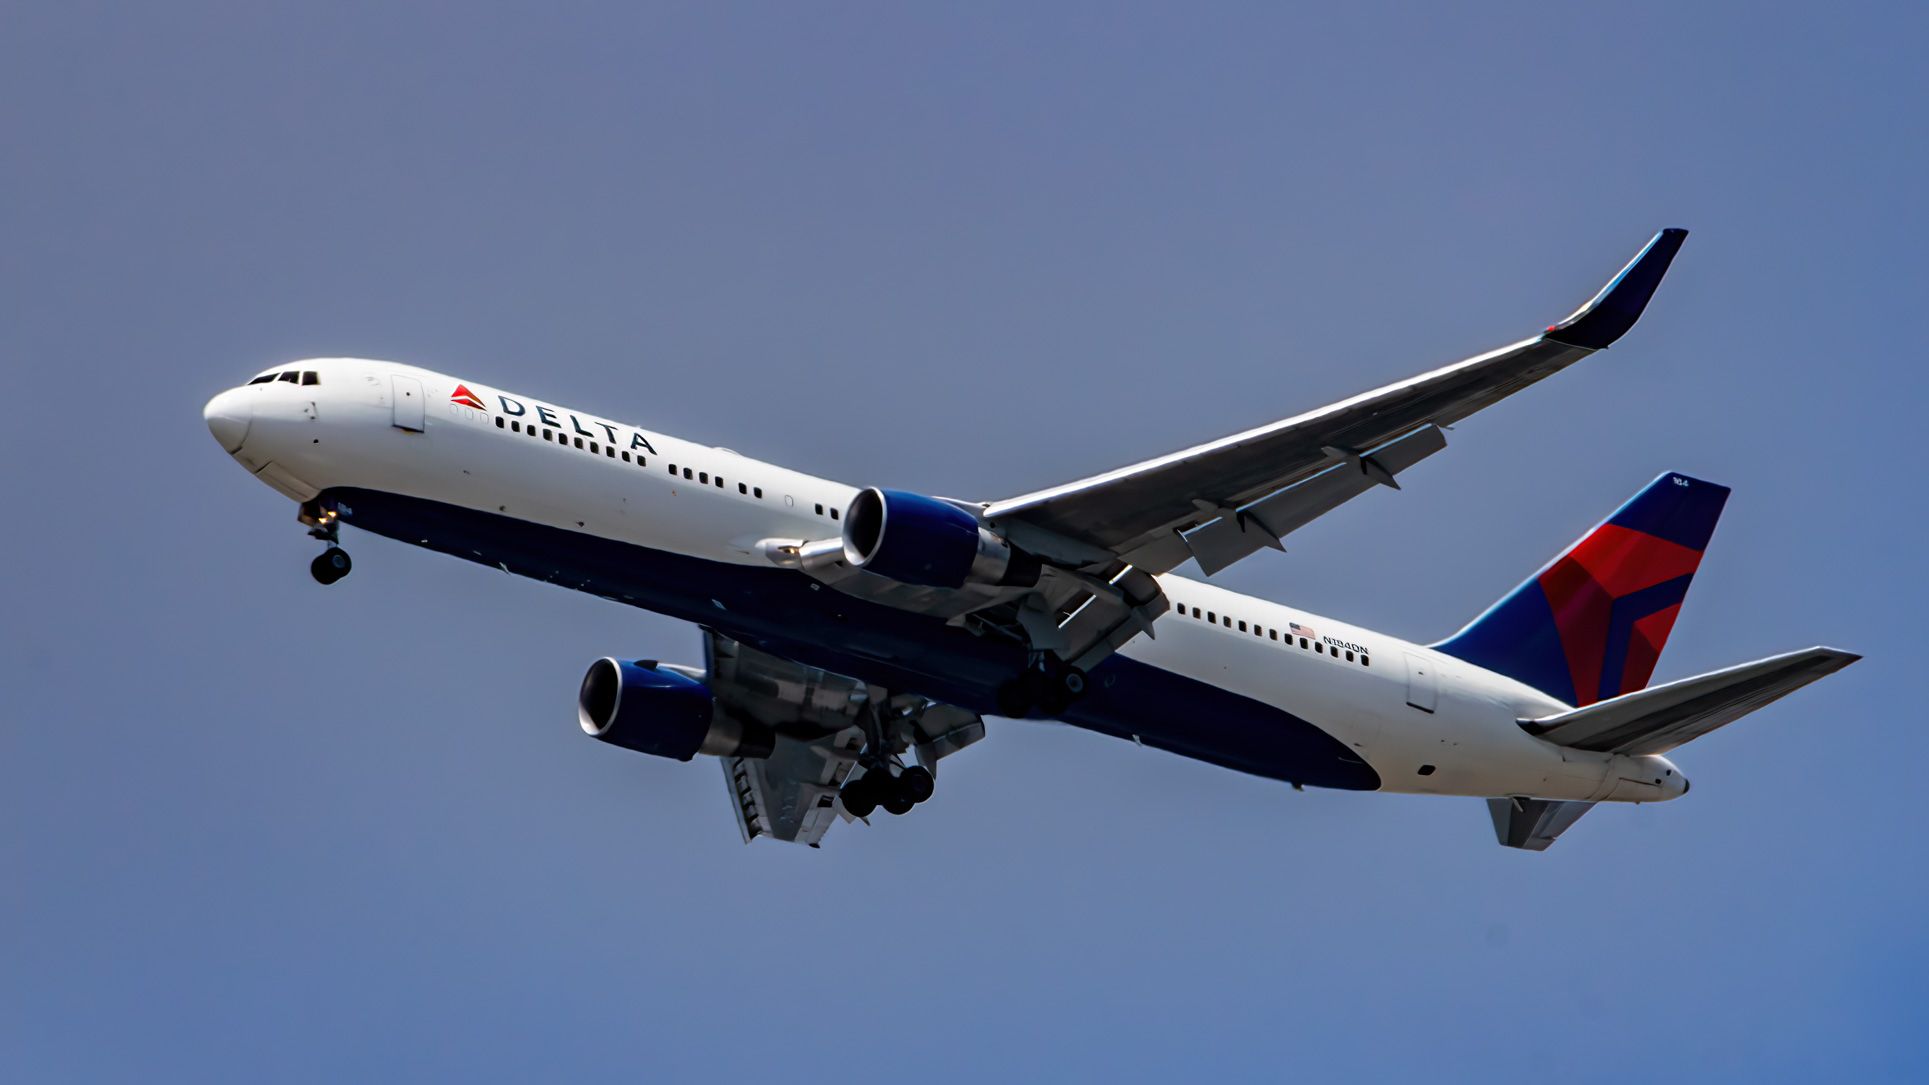 Delta Air Lines' Boeing 767-300 on Final - With Gear and Flaps Down, Registry # N184DN